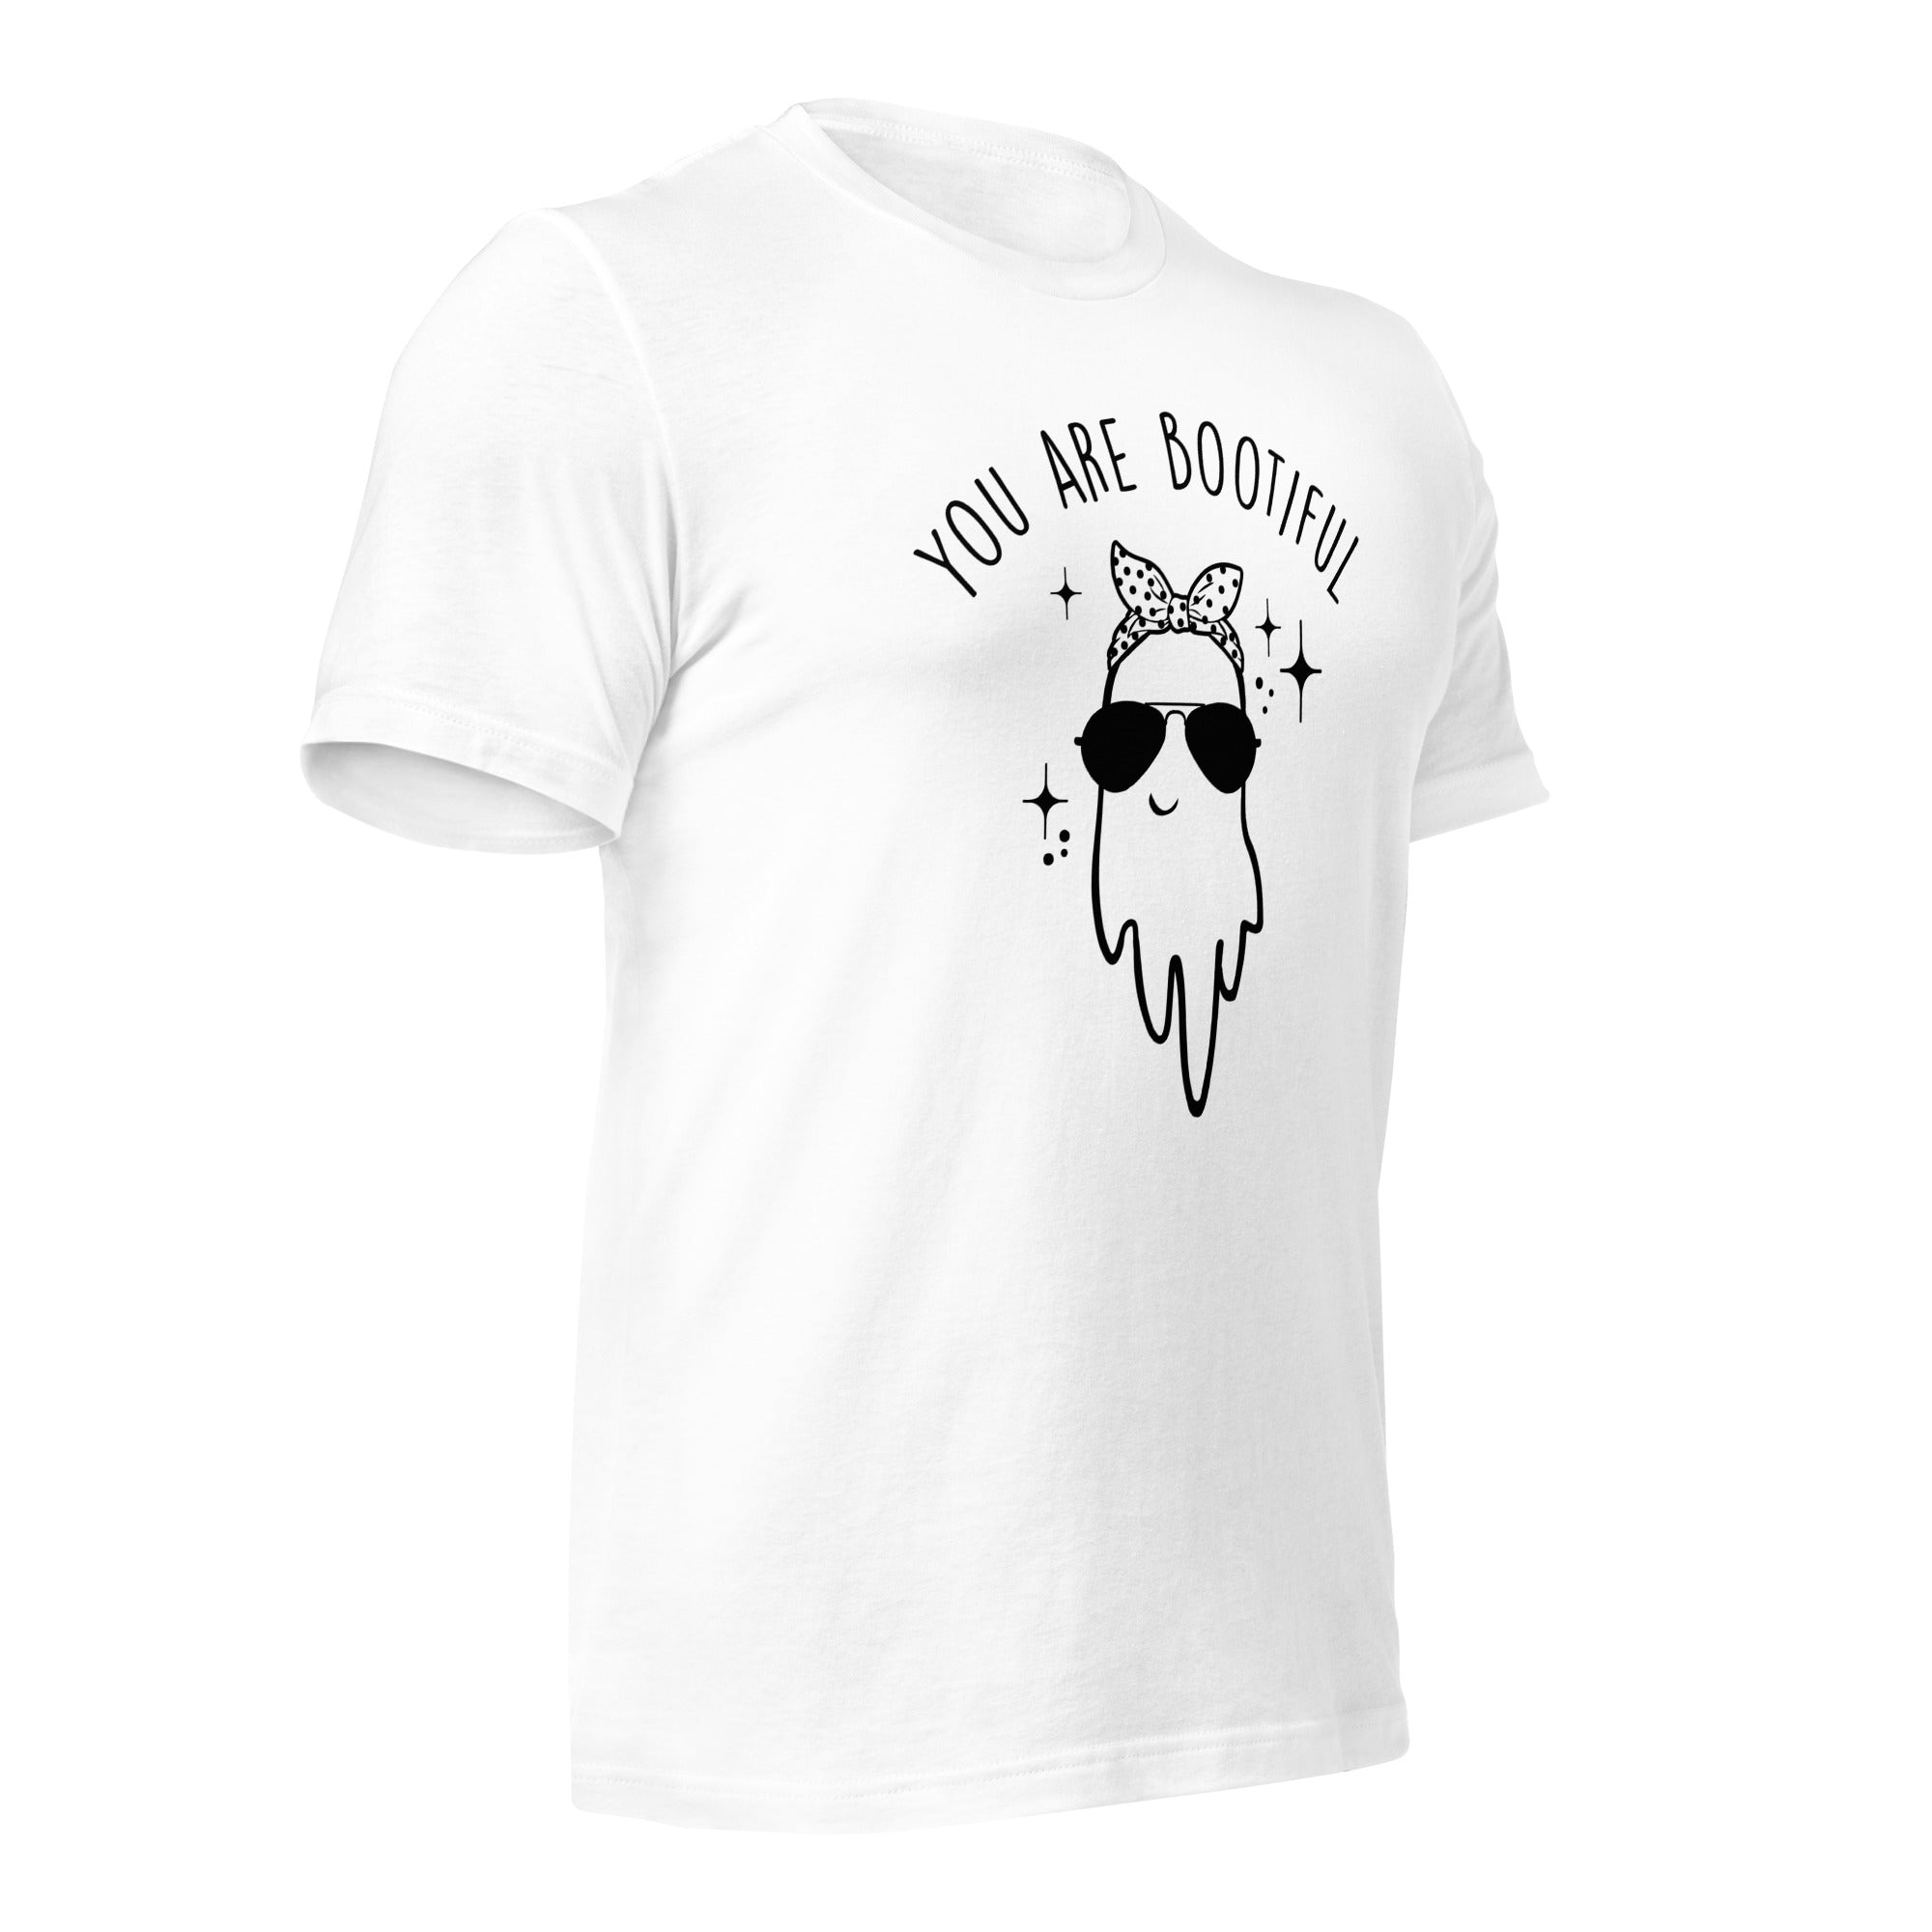 You Are Bootiful Unisex t-shirt - Cotton Plus Cream